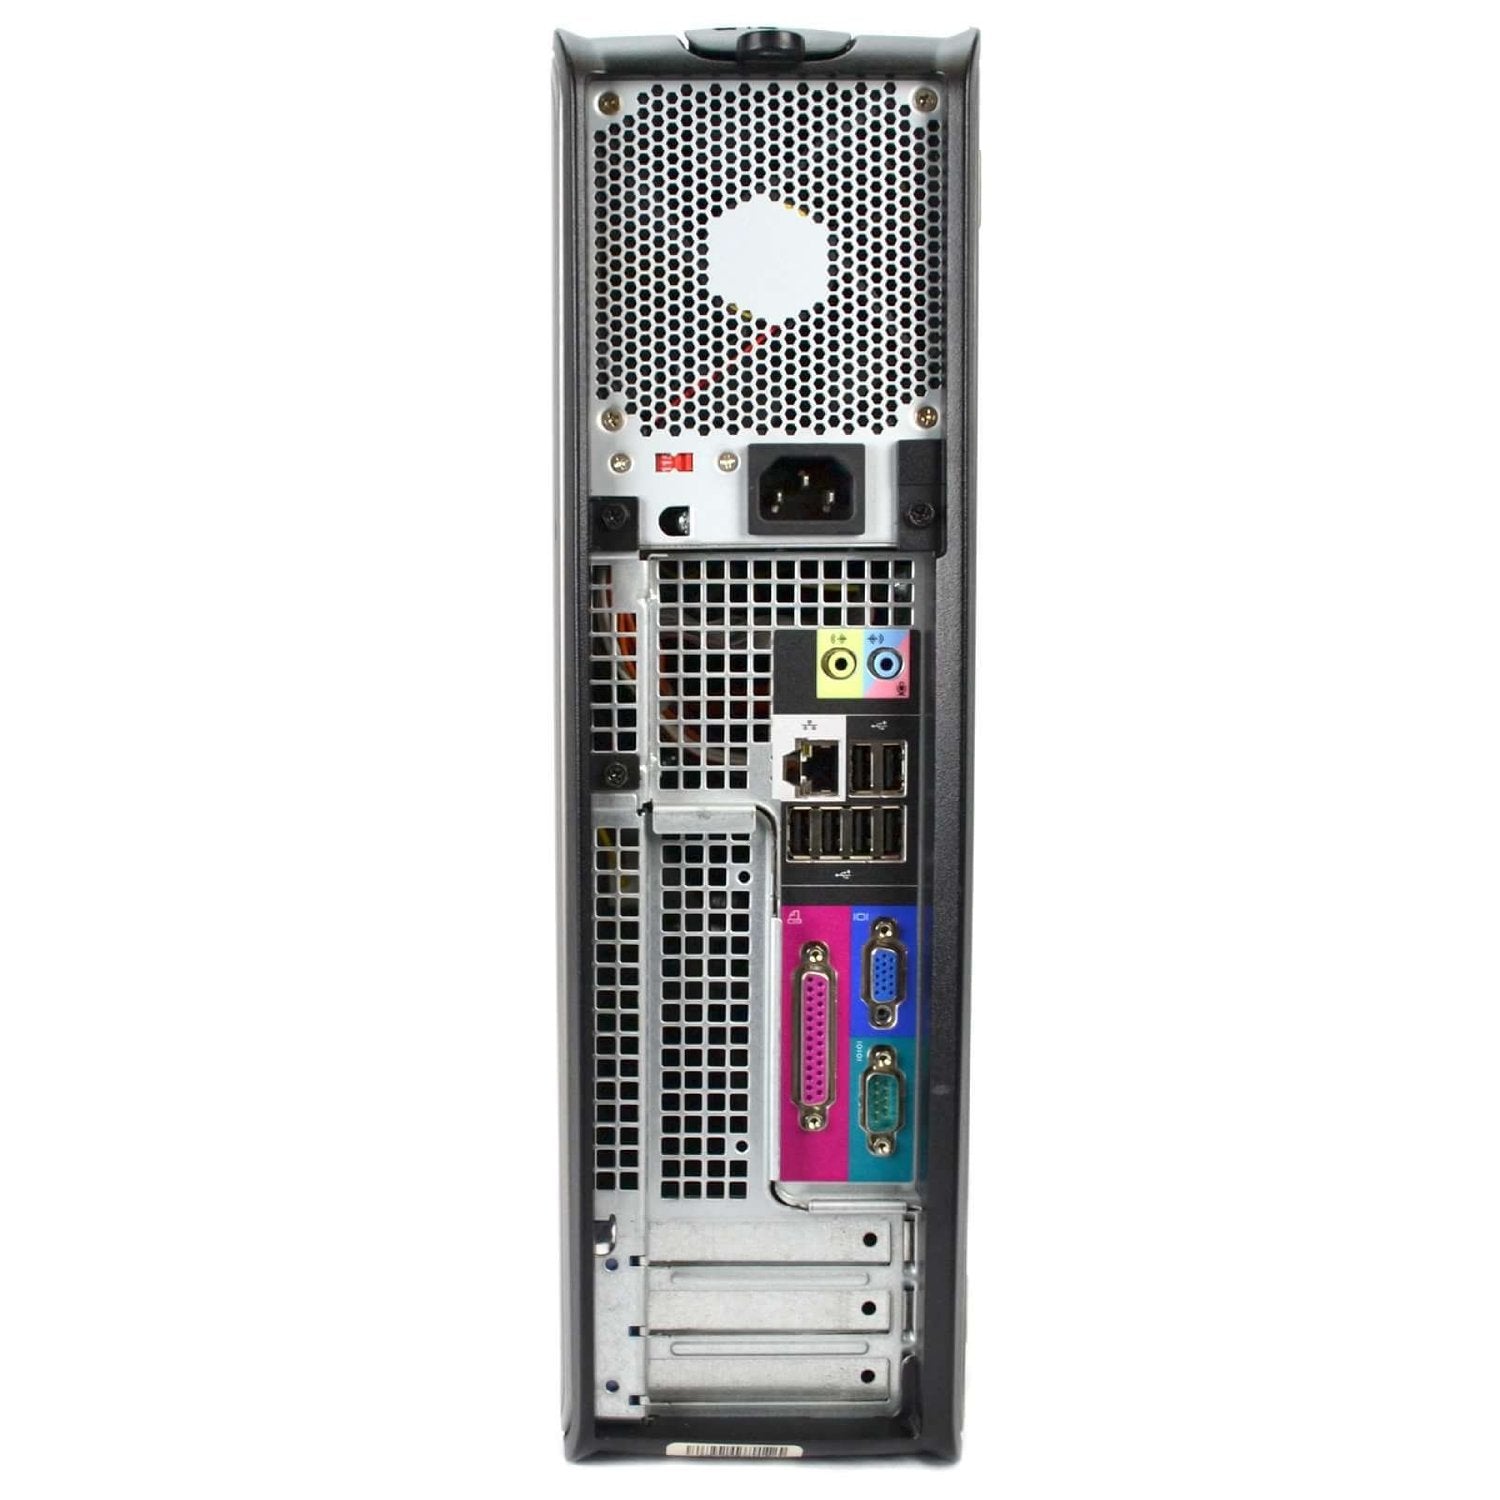 Dell Optiplex 2.9 GHz Core 2 Duo PC, 8GB, 1 TB HDD, Windows 10 Home x64, 19" Dual Monitor, Wireless Mouse & Keyboard